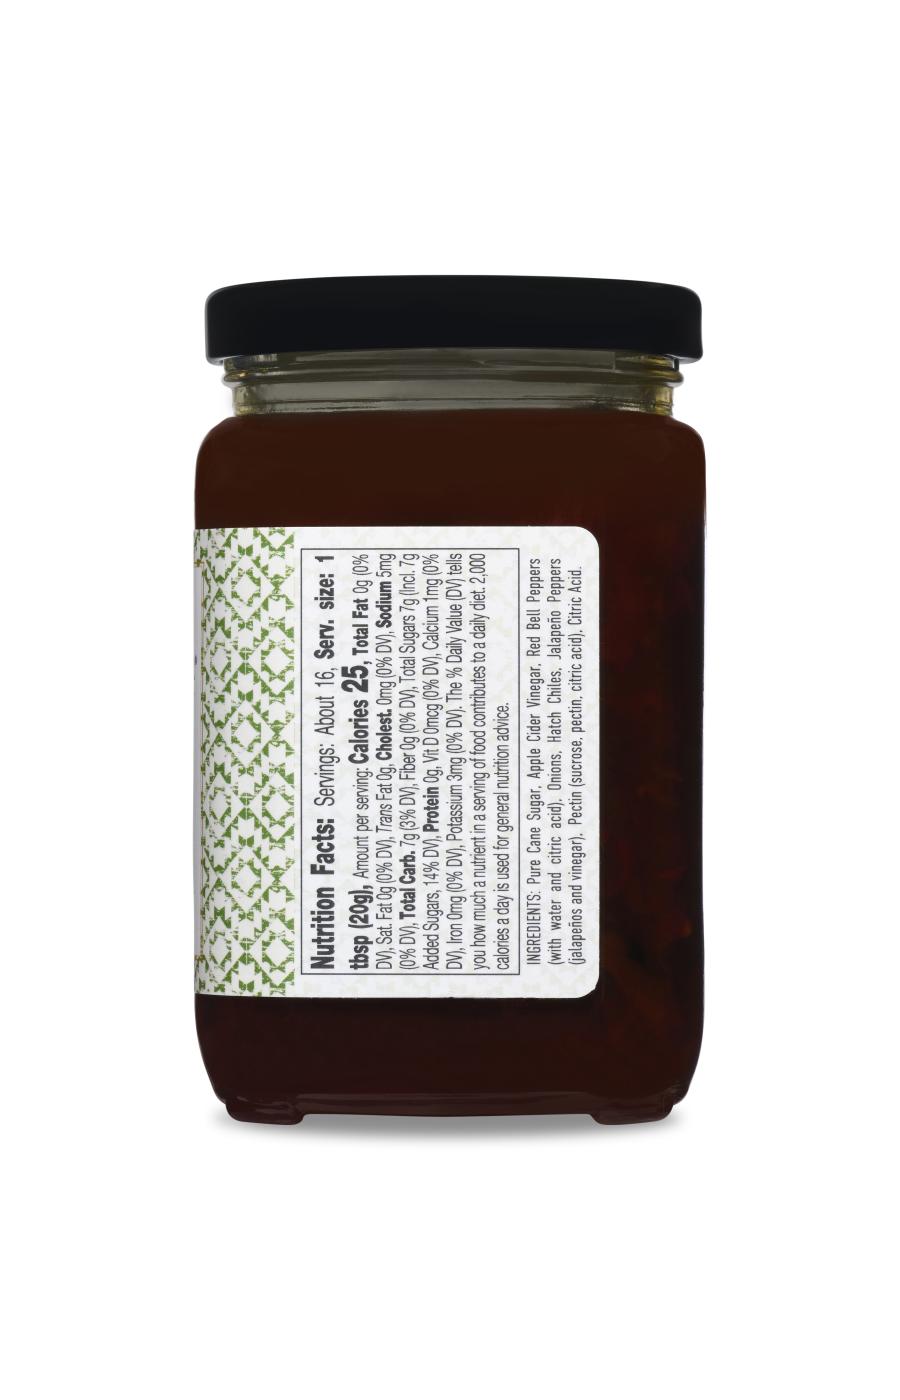 Fischer & Wieser Four Star Provisions Hatch Chile Jalapeno Jam; image 2 of 3